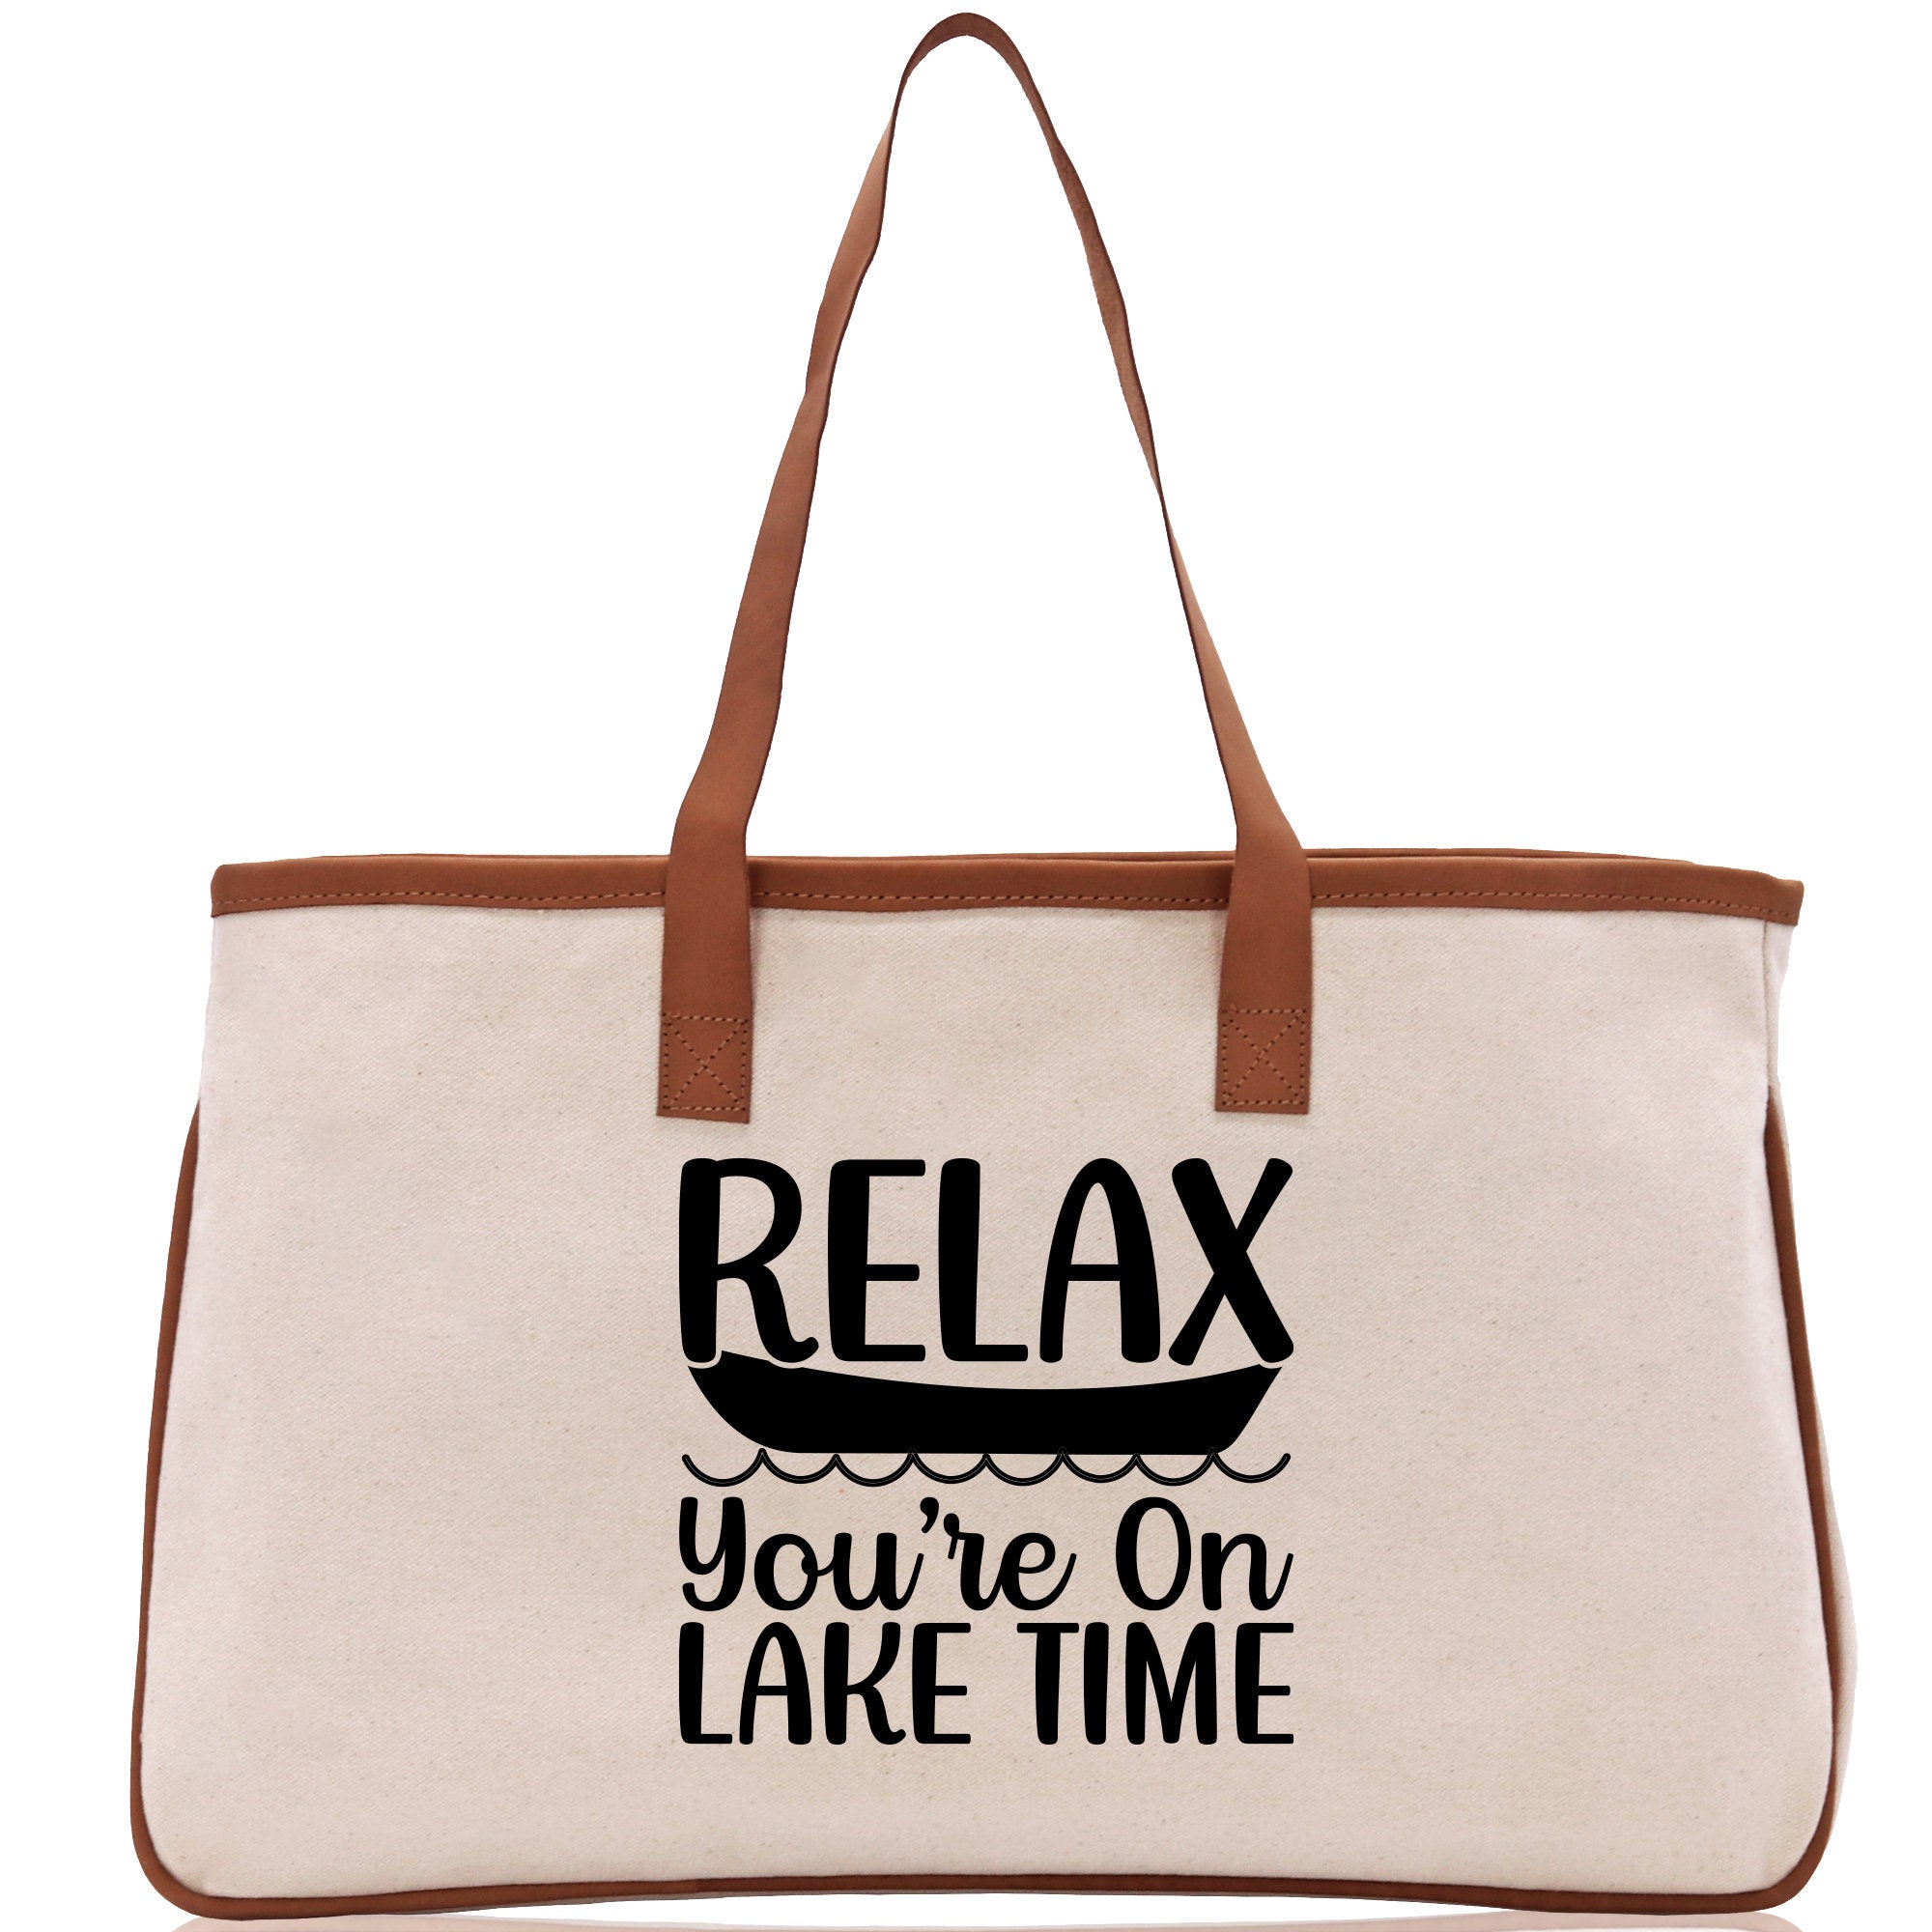 Relax You're On Lake Time Cotton Canvas Chic Tote Bag Camping Tote Lake Lover Gift Tote Bag Outdoor Tote Weekender Tote Laker Tote